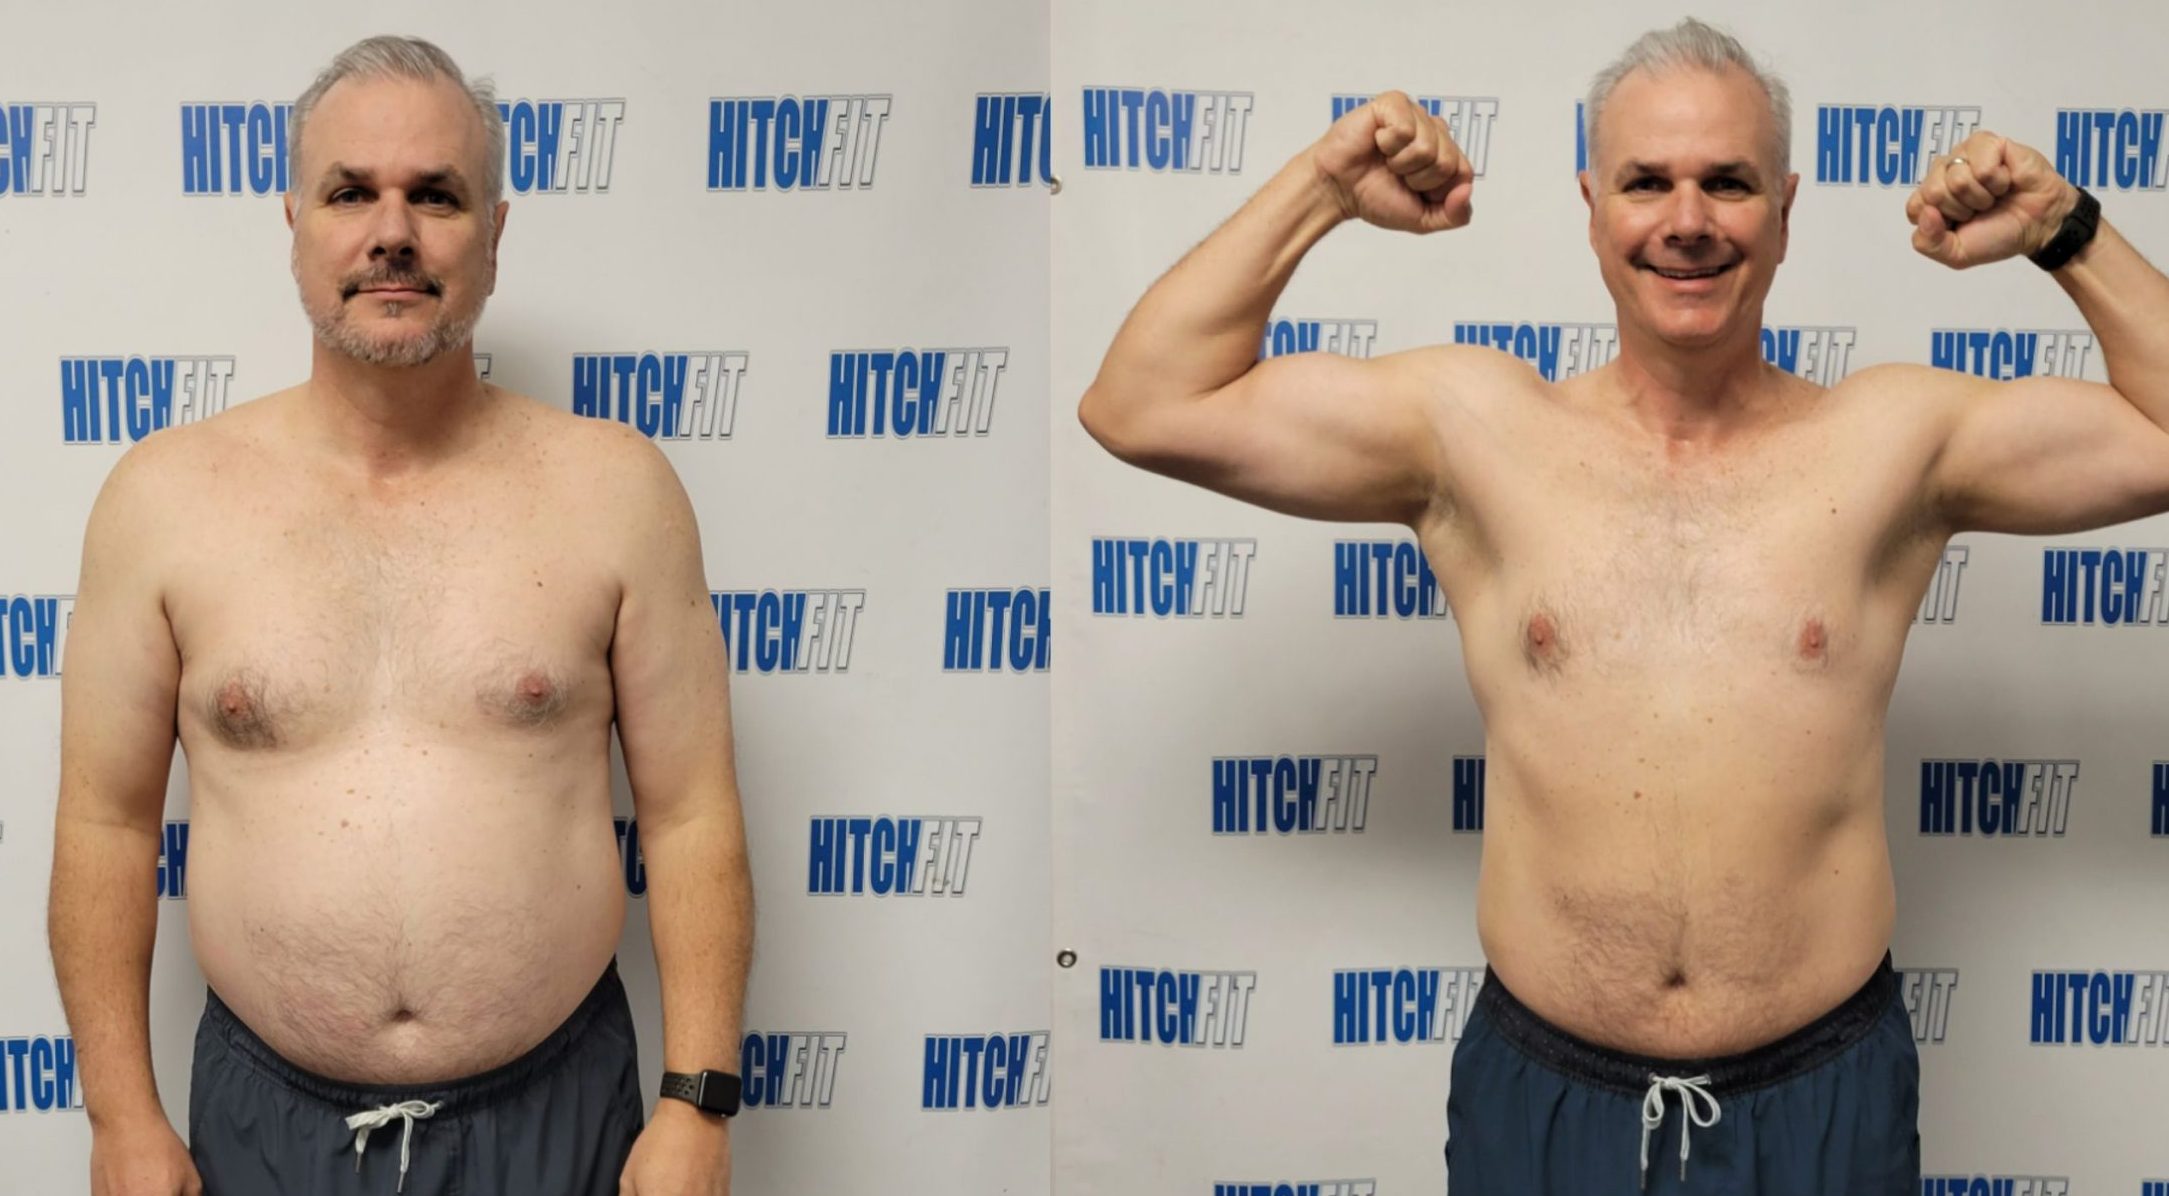 lose 30 pounds at hitch fit gym